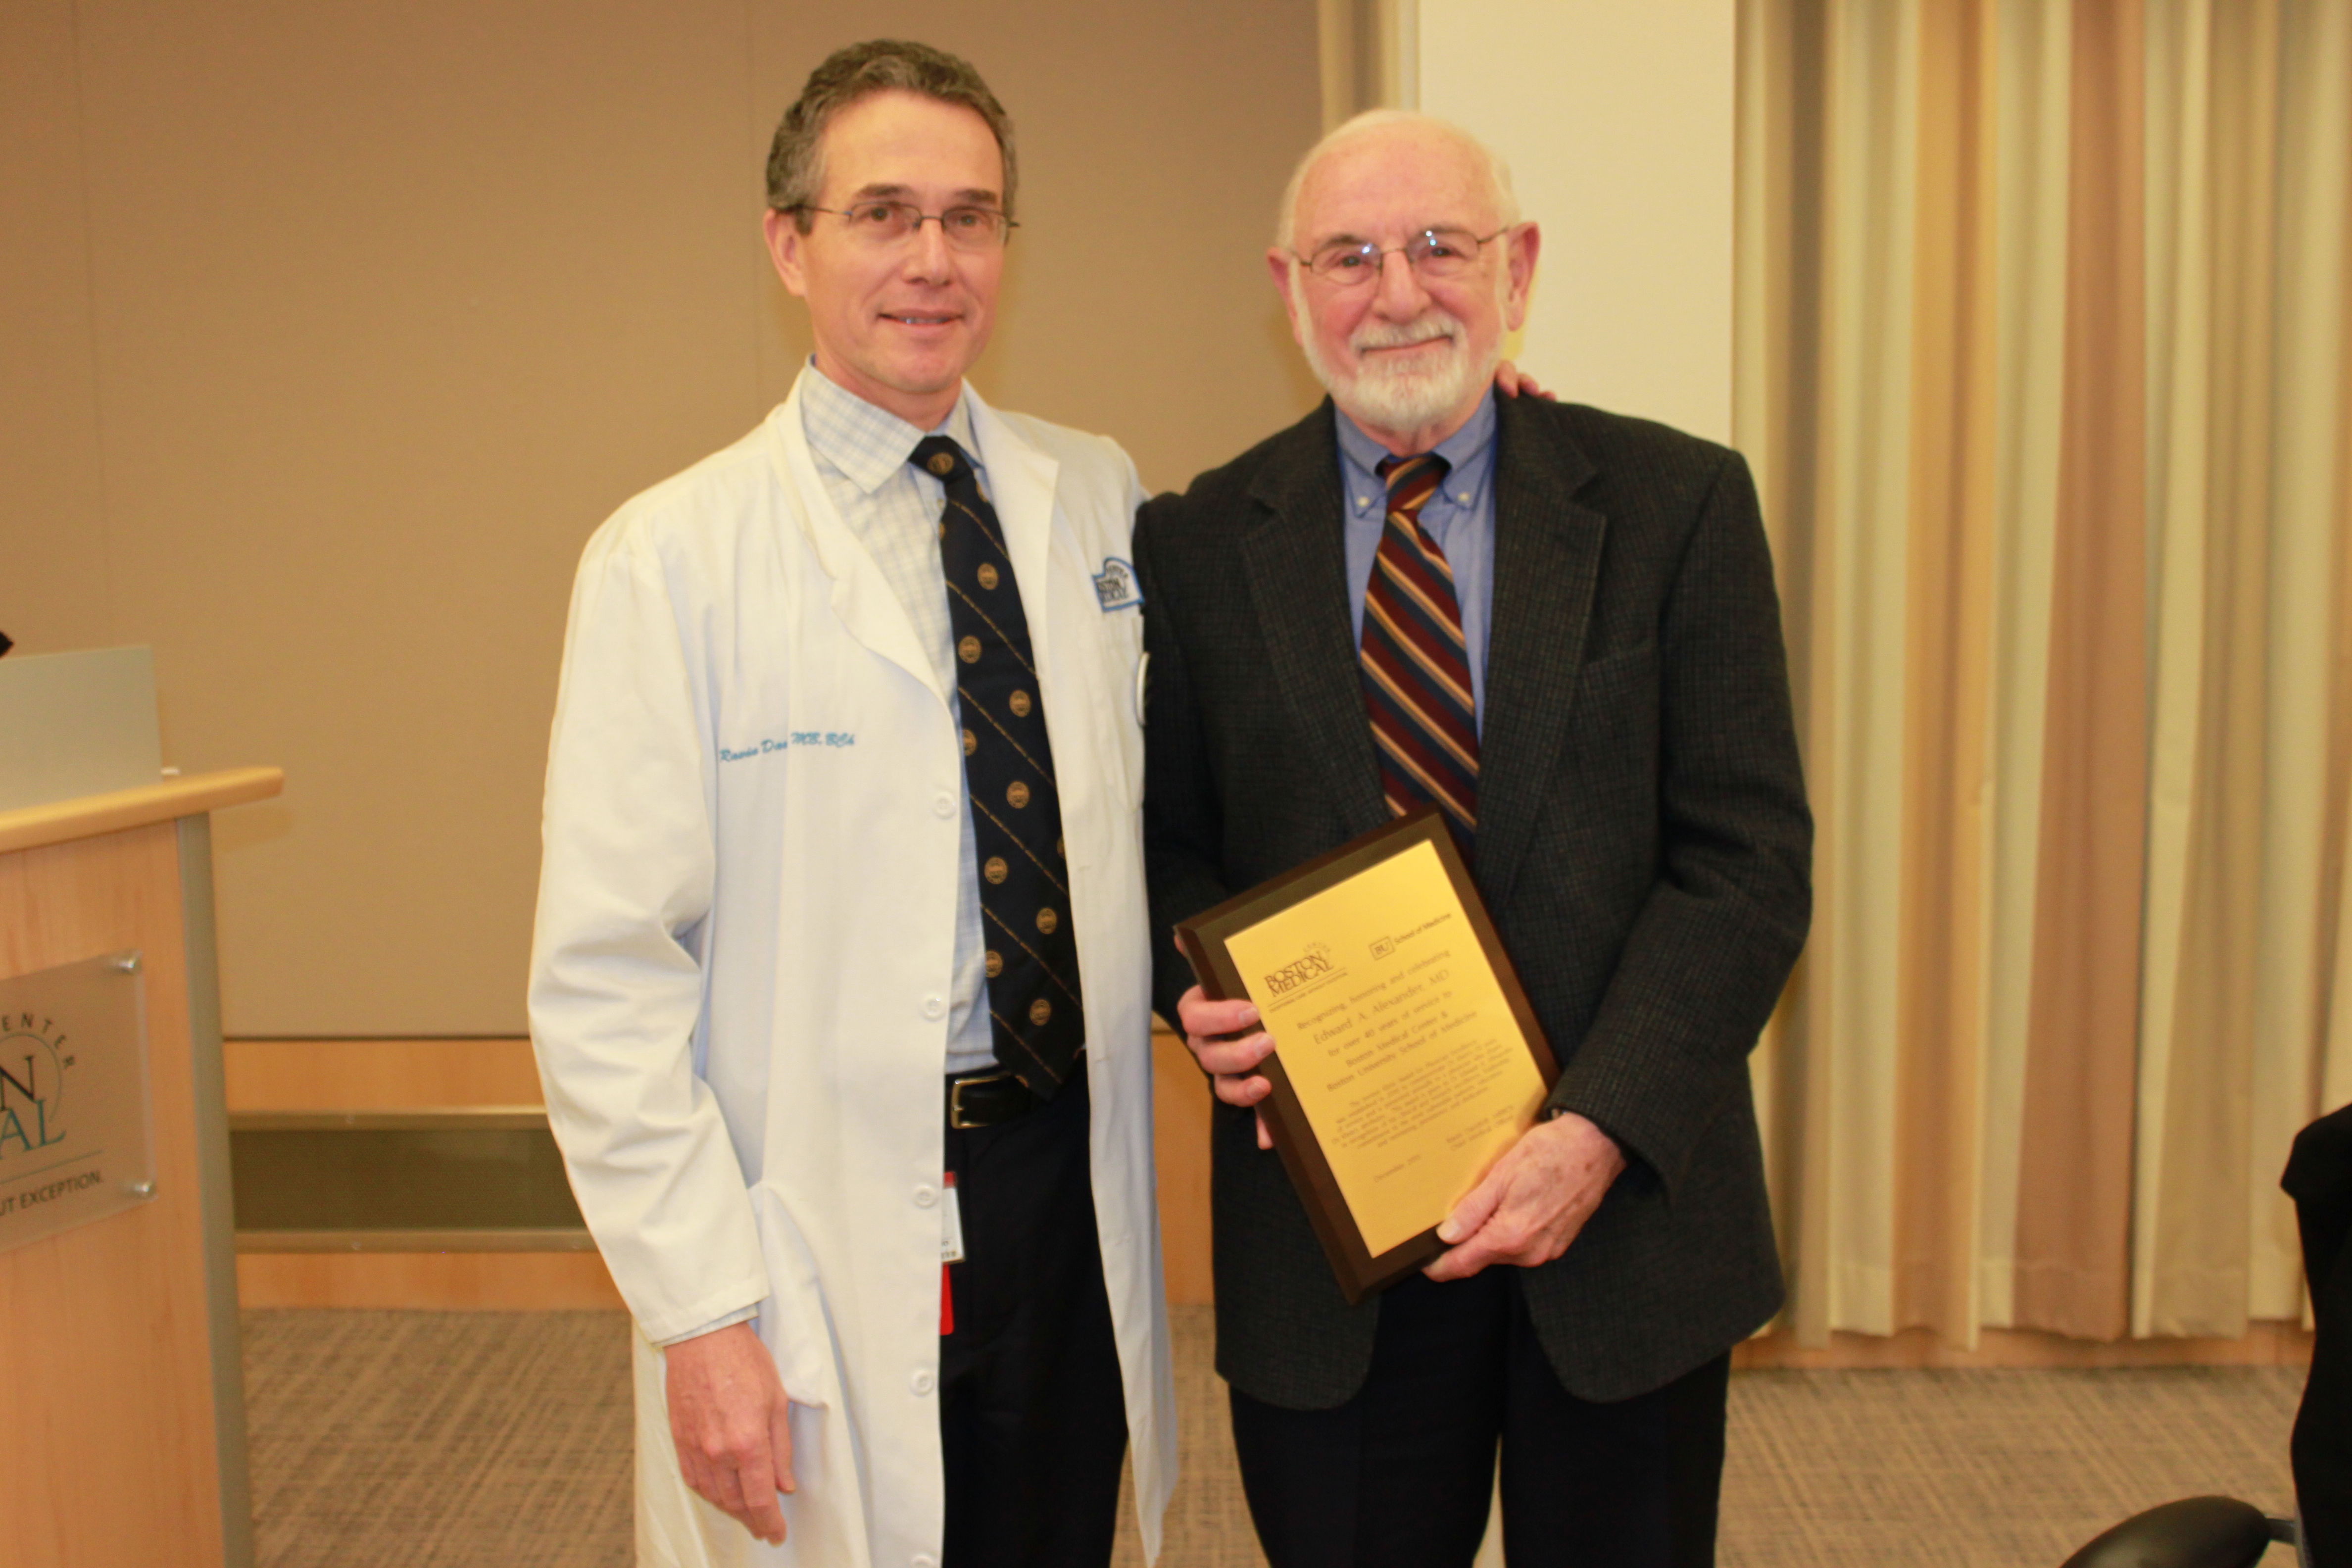 Edward Alexander, MD, (right) receives the Jerome Klein Award for Physician Excellence from Dr. Ravin Davidoff, Chief Medical Officer (left) at BMC.